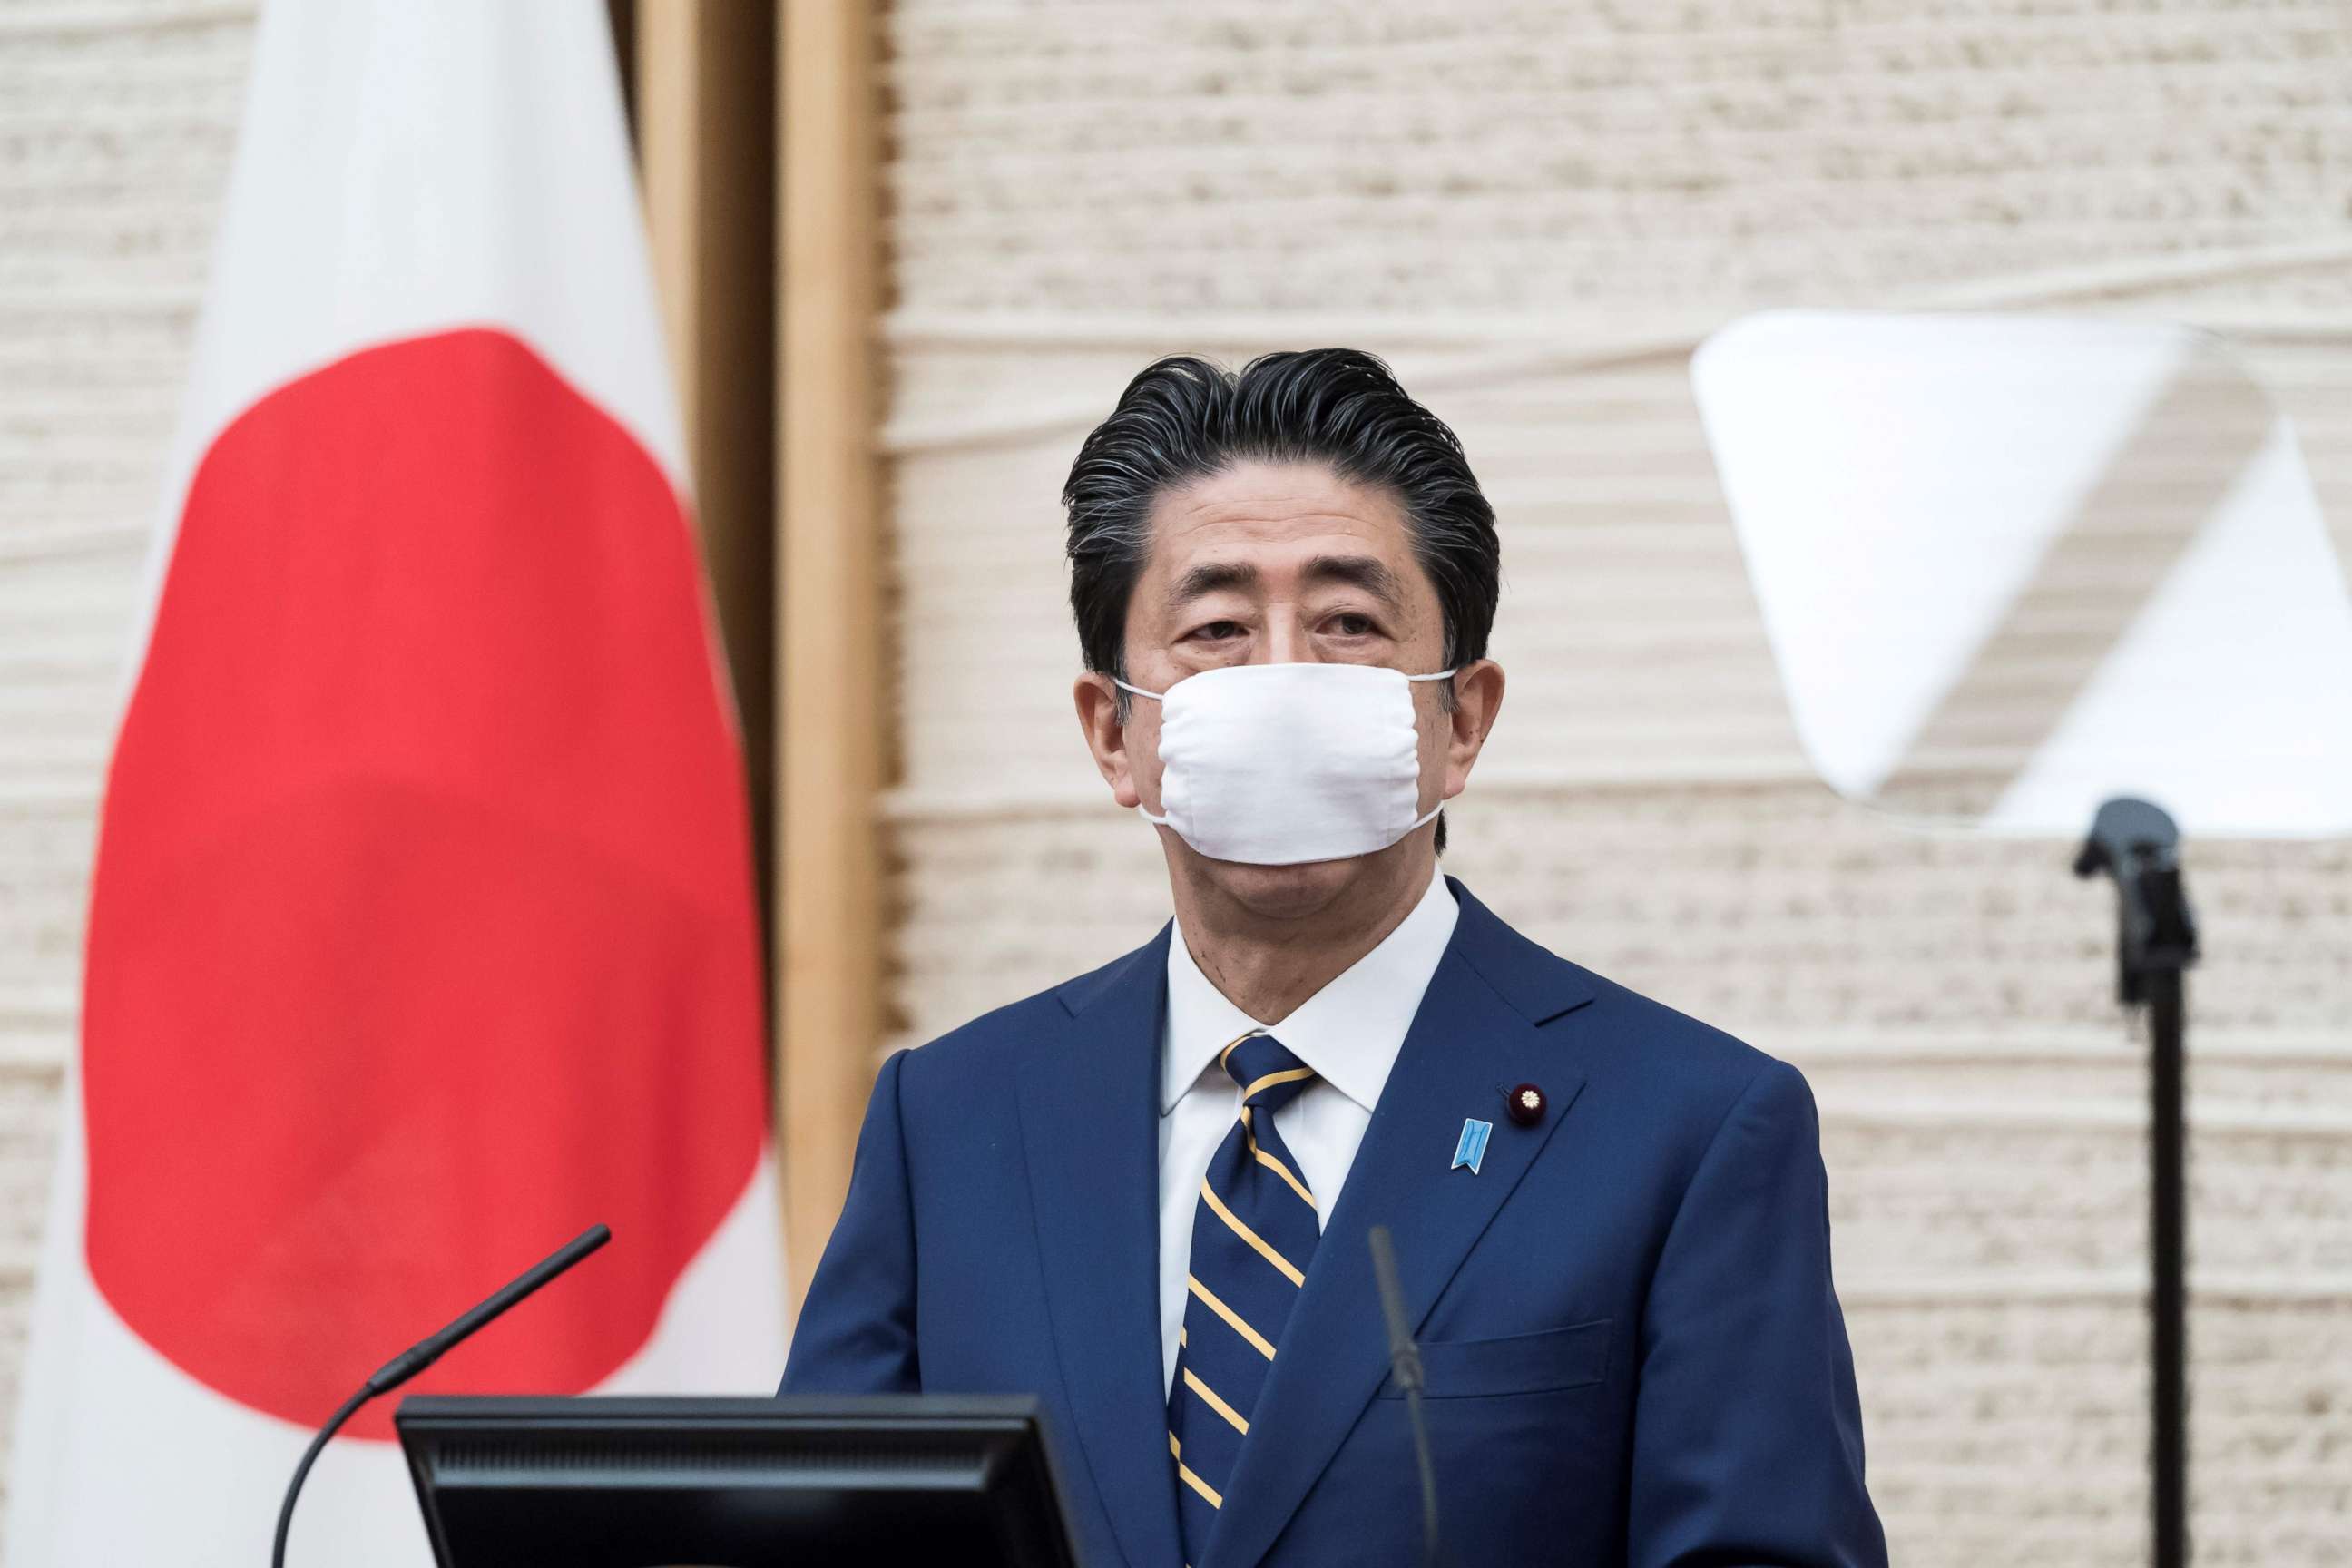 PHOTO: Japanese Prime Minister Shinzo Abe wearing a face mask attends a press conference at his official residence in Tokyo on April 7, 2020. 